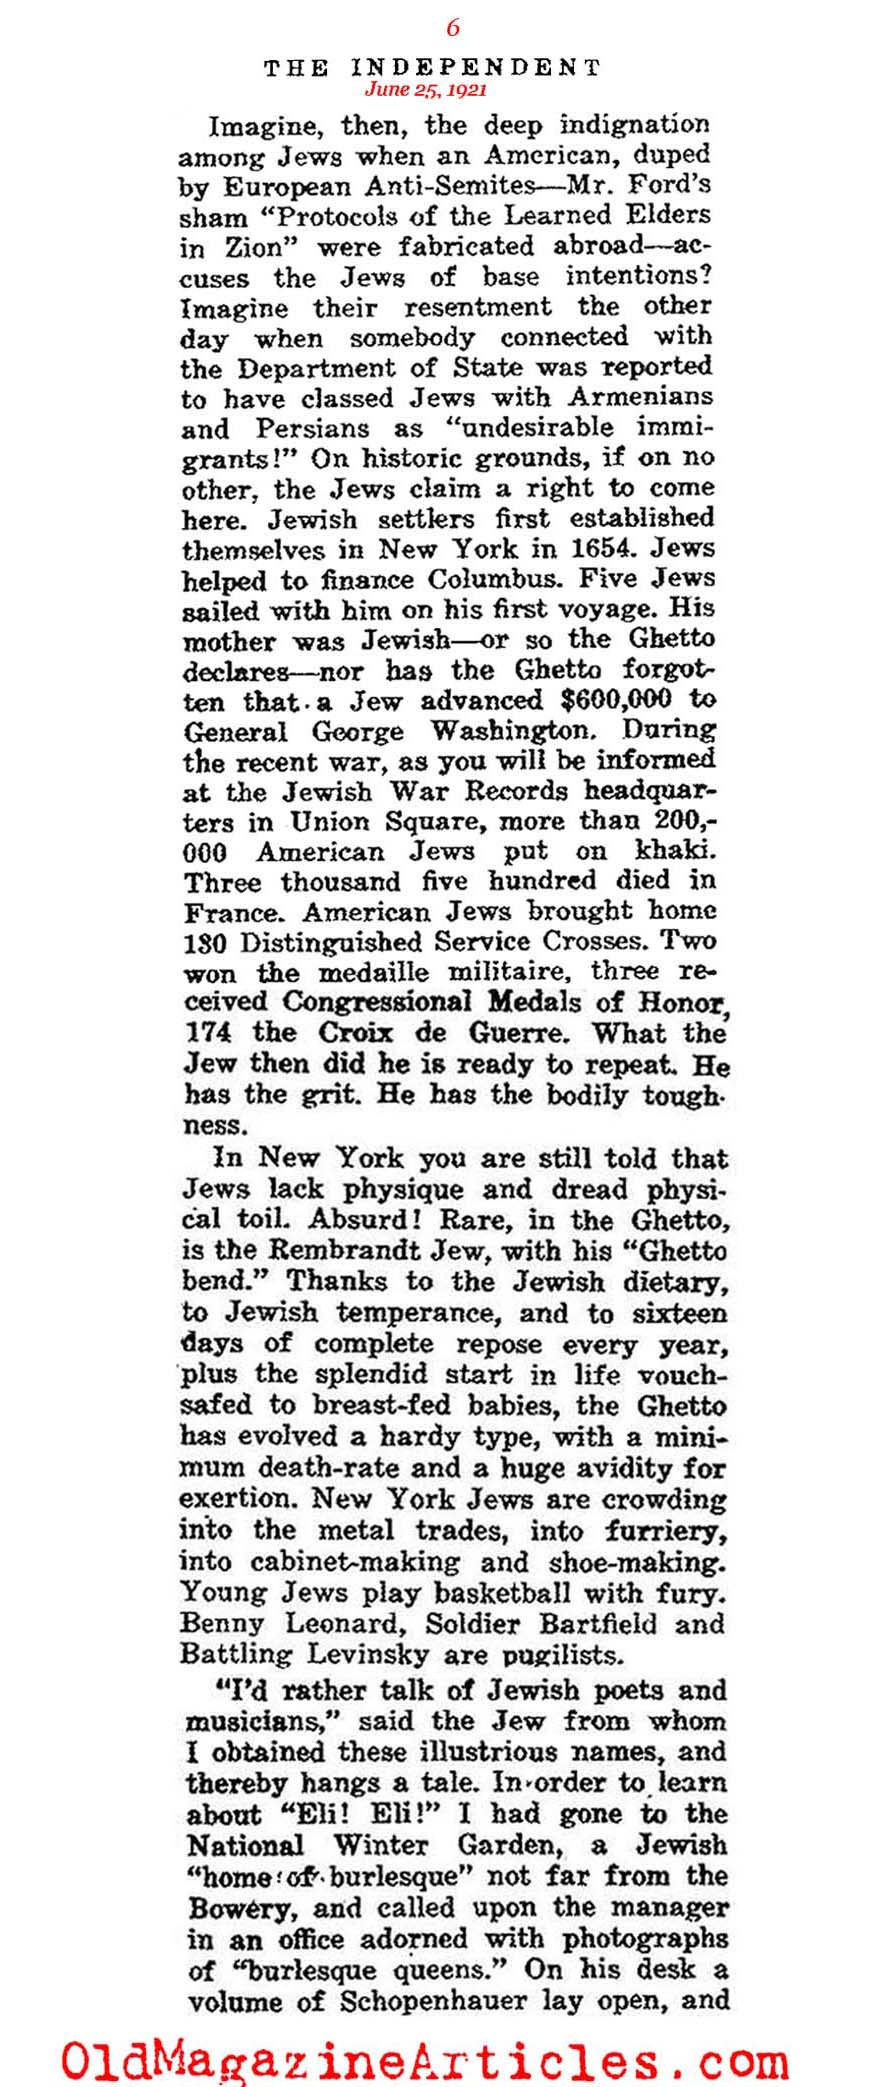 Jewish Population Growth in New York (The Independent, 1921)